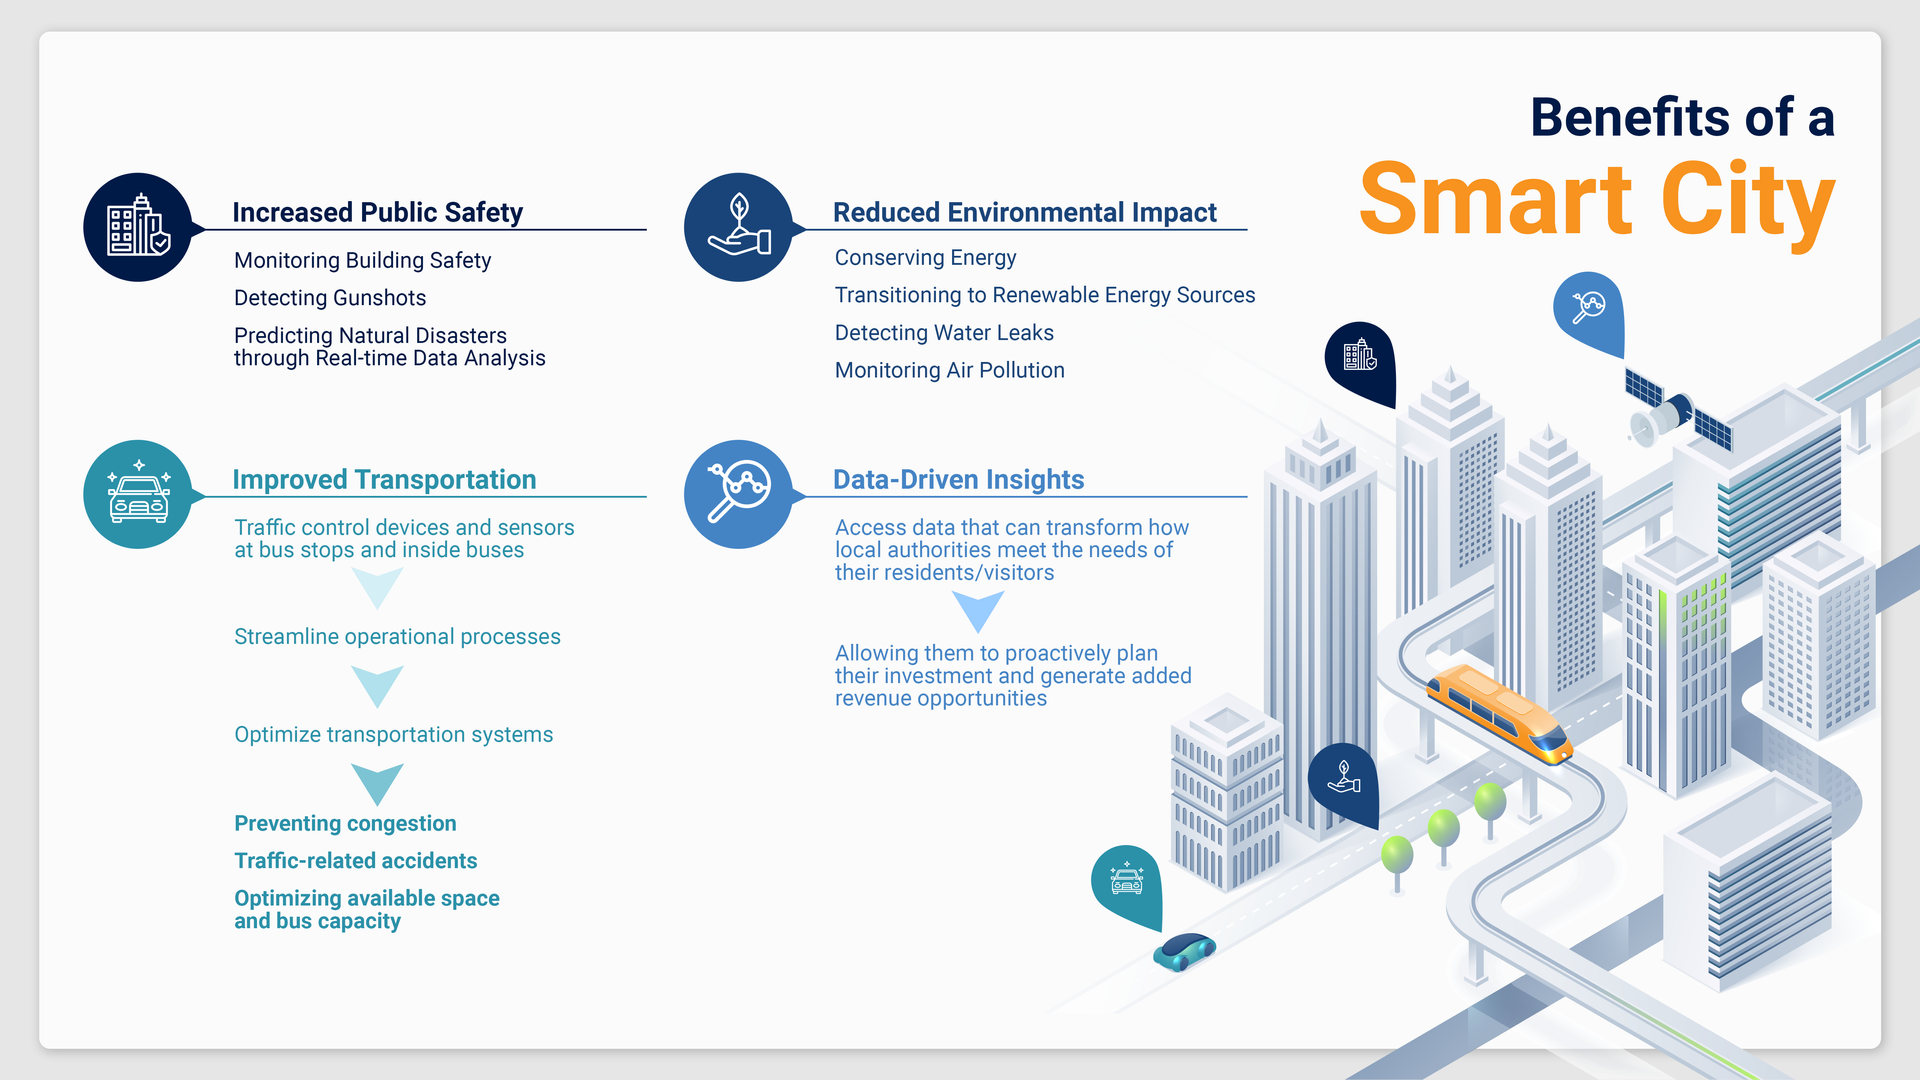 An infographic or diagram visualizing four overall benefits of a smart city, which are providing increased public safety, improved transportation, reduced environmental impact, and data- driven insights.